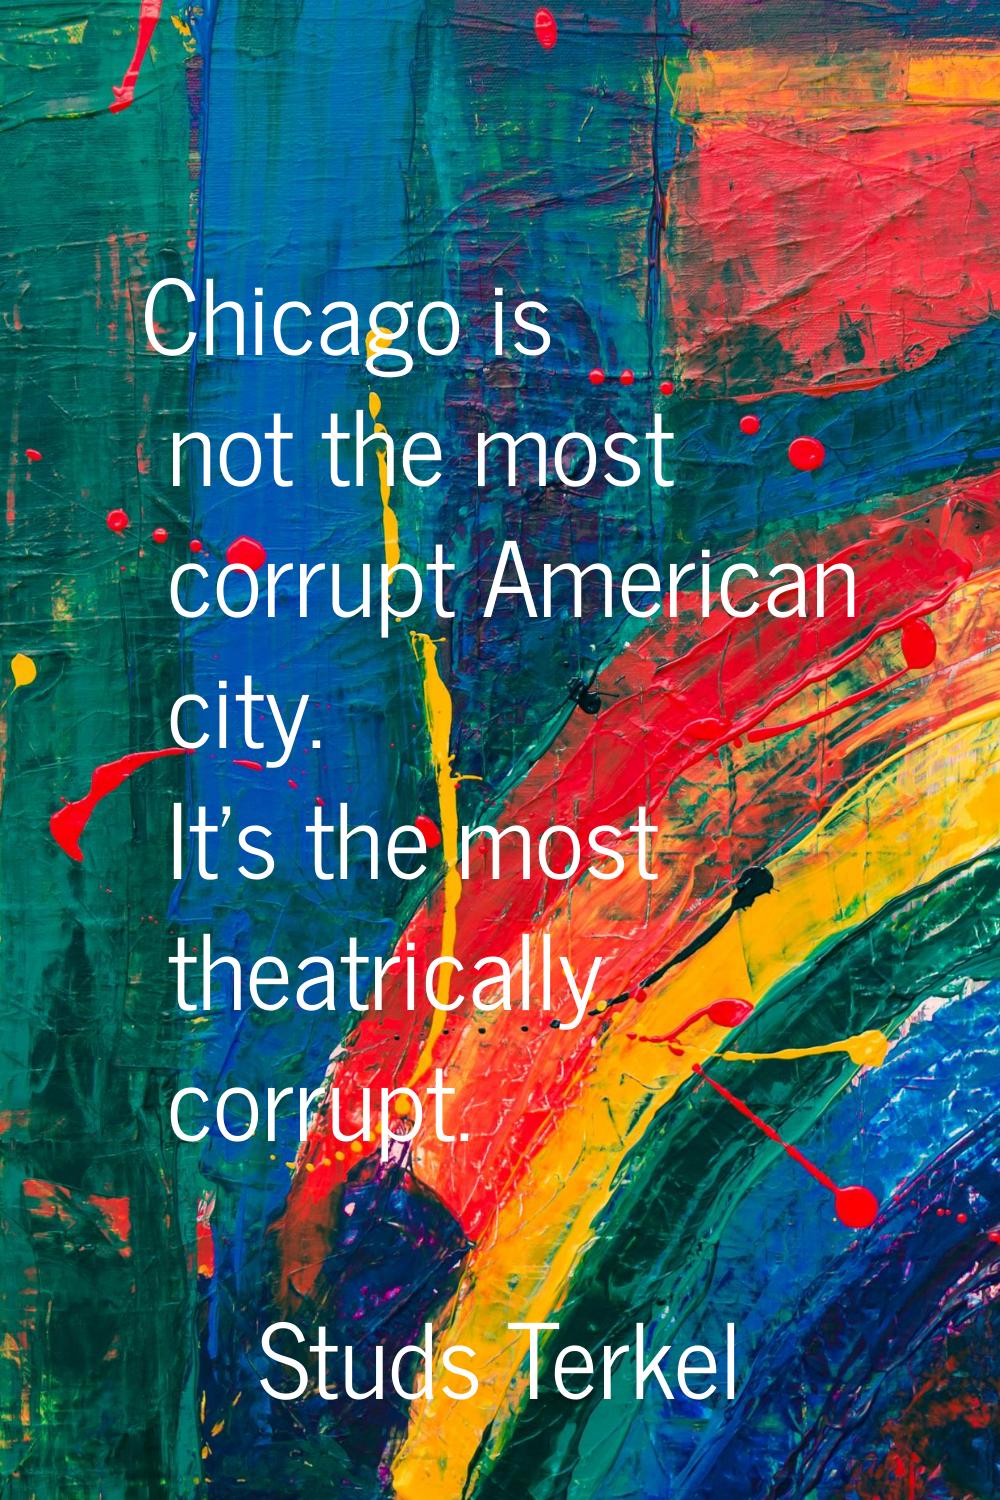 Chicago is not the most corrupt American city. It's the most theatrically corrupt.